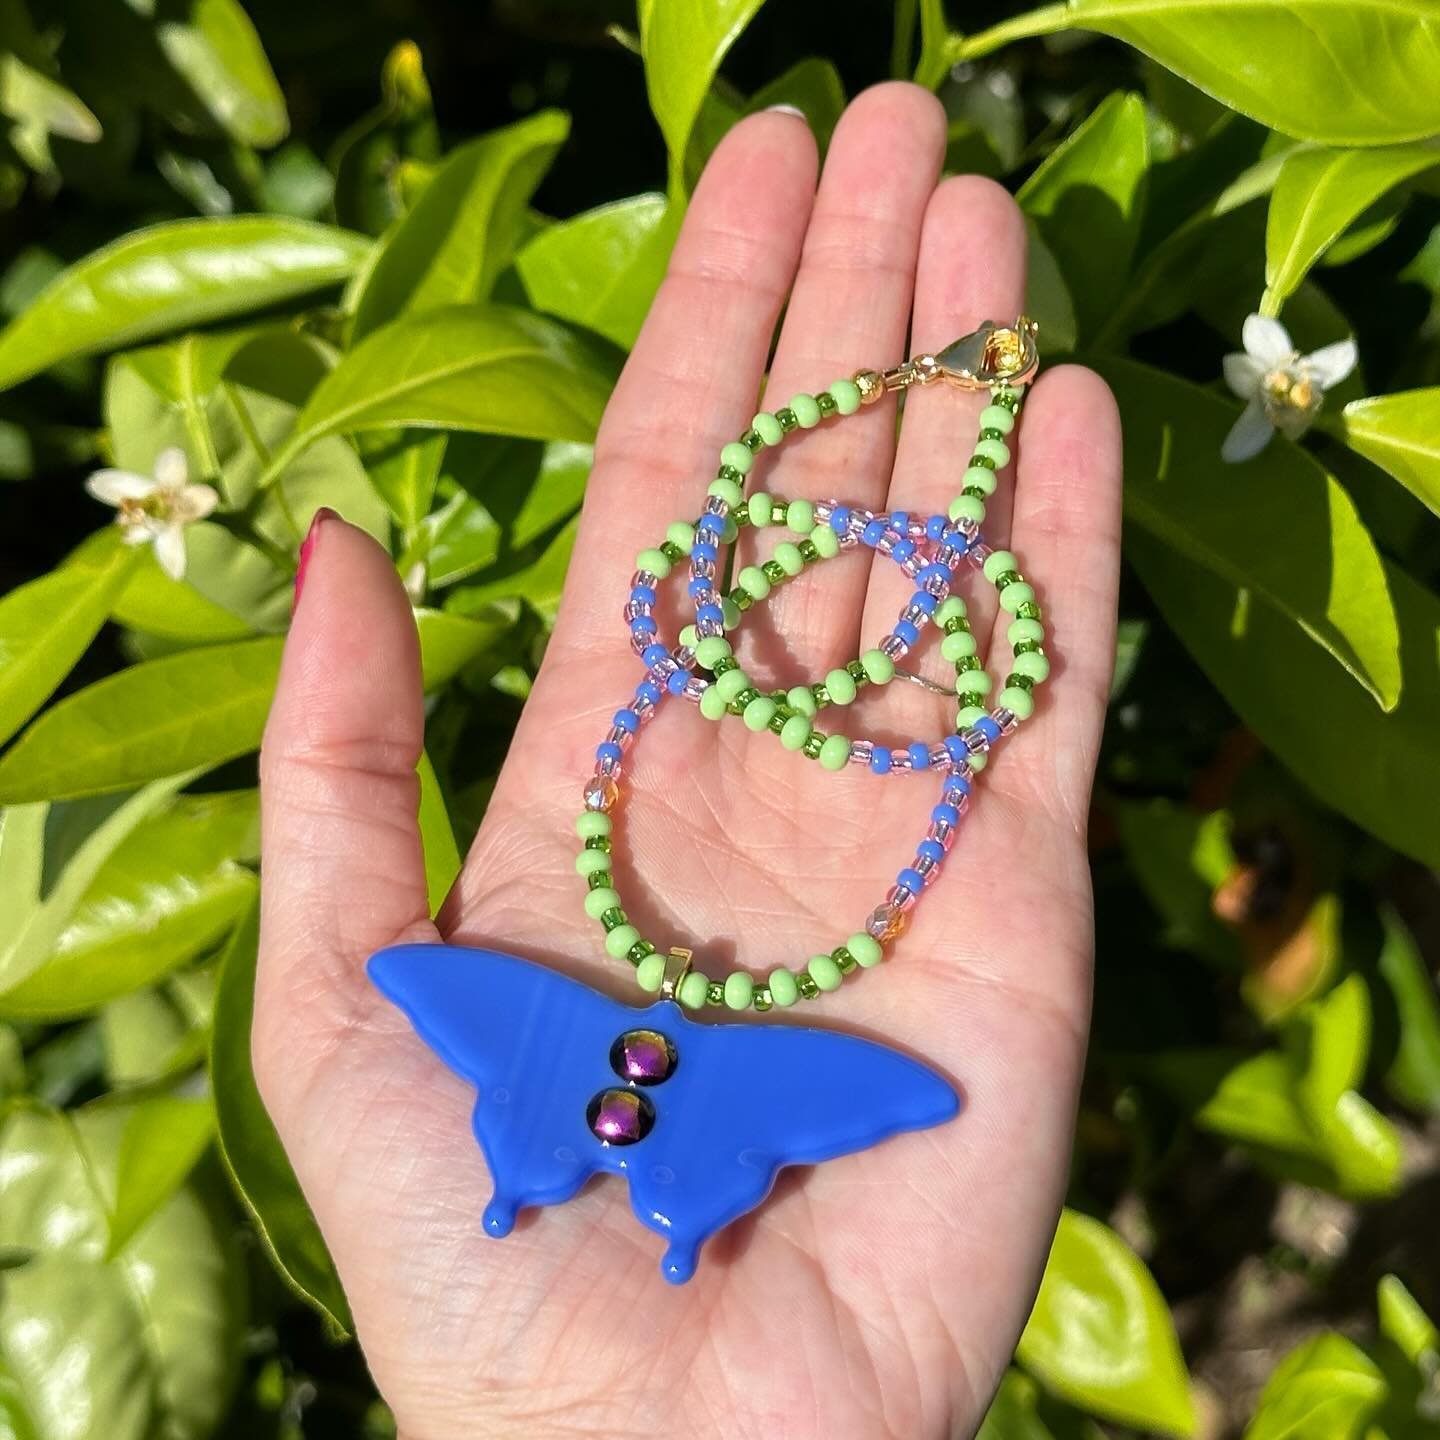 sneeeeaaaak peeeeeek @ a couple collab pieces from our spring collection! shop the full drop online now and this saturday @manicpixiedreammarket&rsquo;s 1-yr anniversary market! 🧚🏻 swipe to see a map of the event and find us @ booth 1️⃣5️⃣!!!